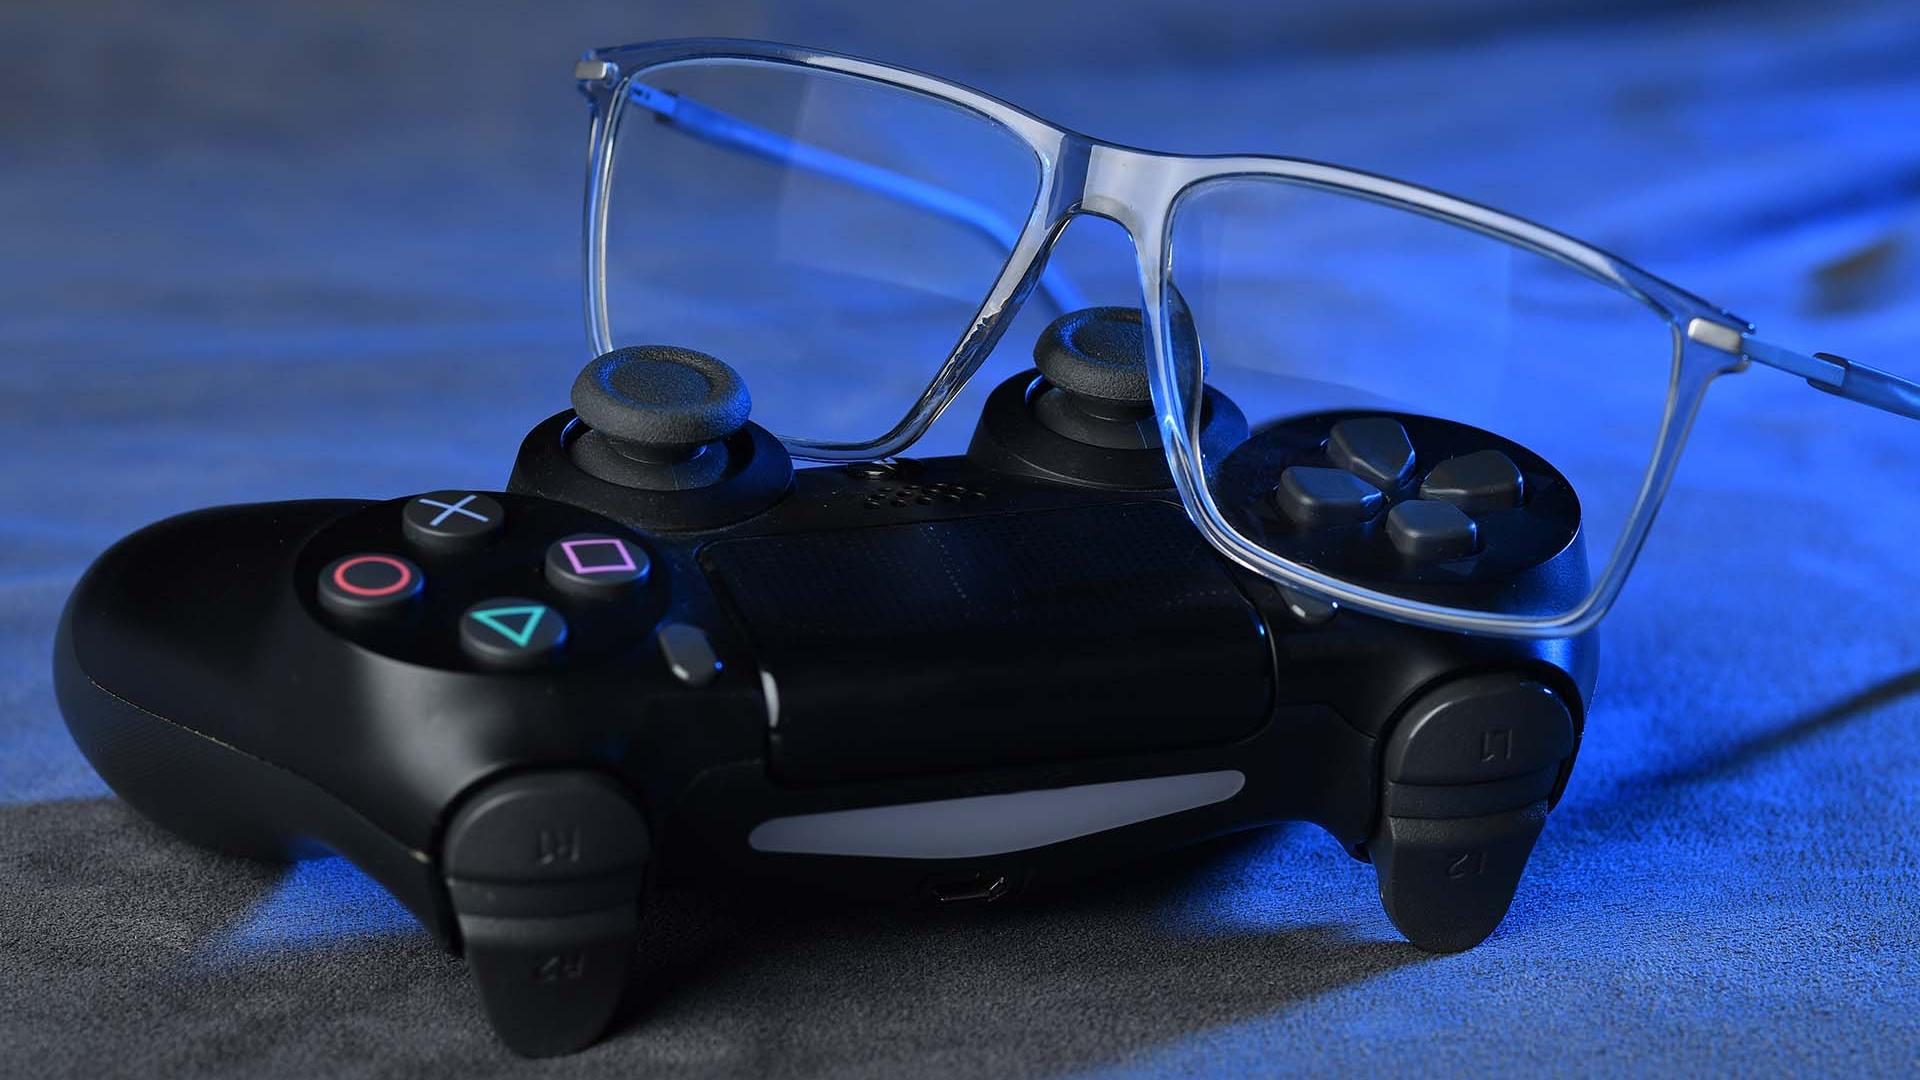 Gaming Glasses – Are Glasses with Blue Light Filters a Good Idea for Gamers?